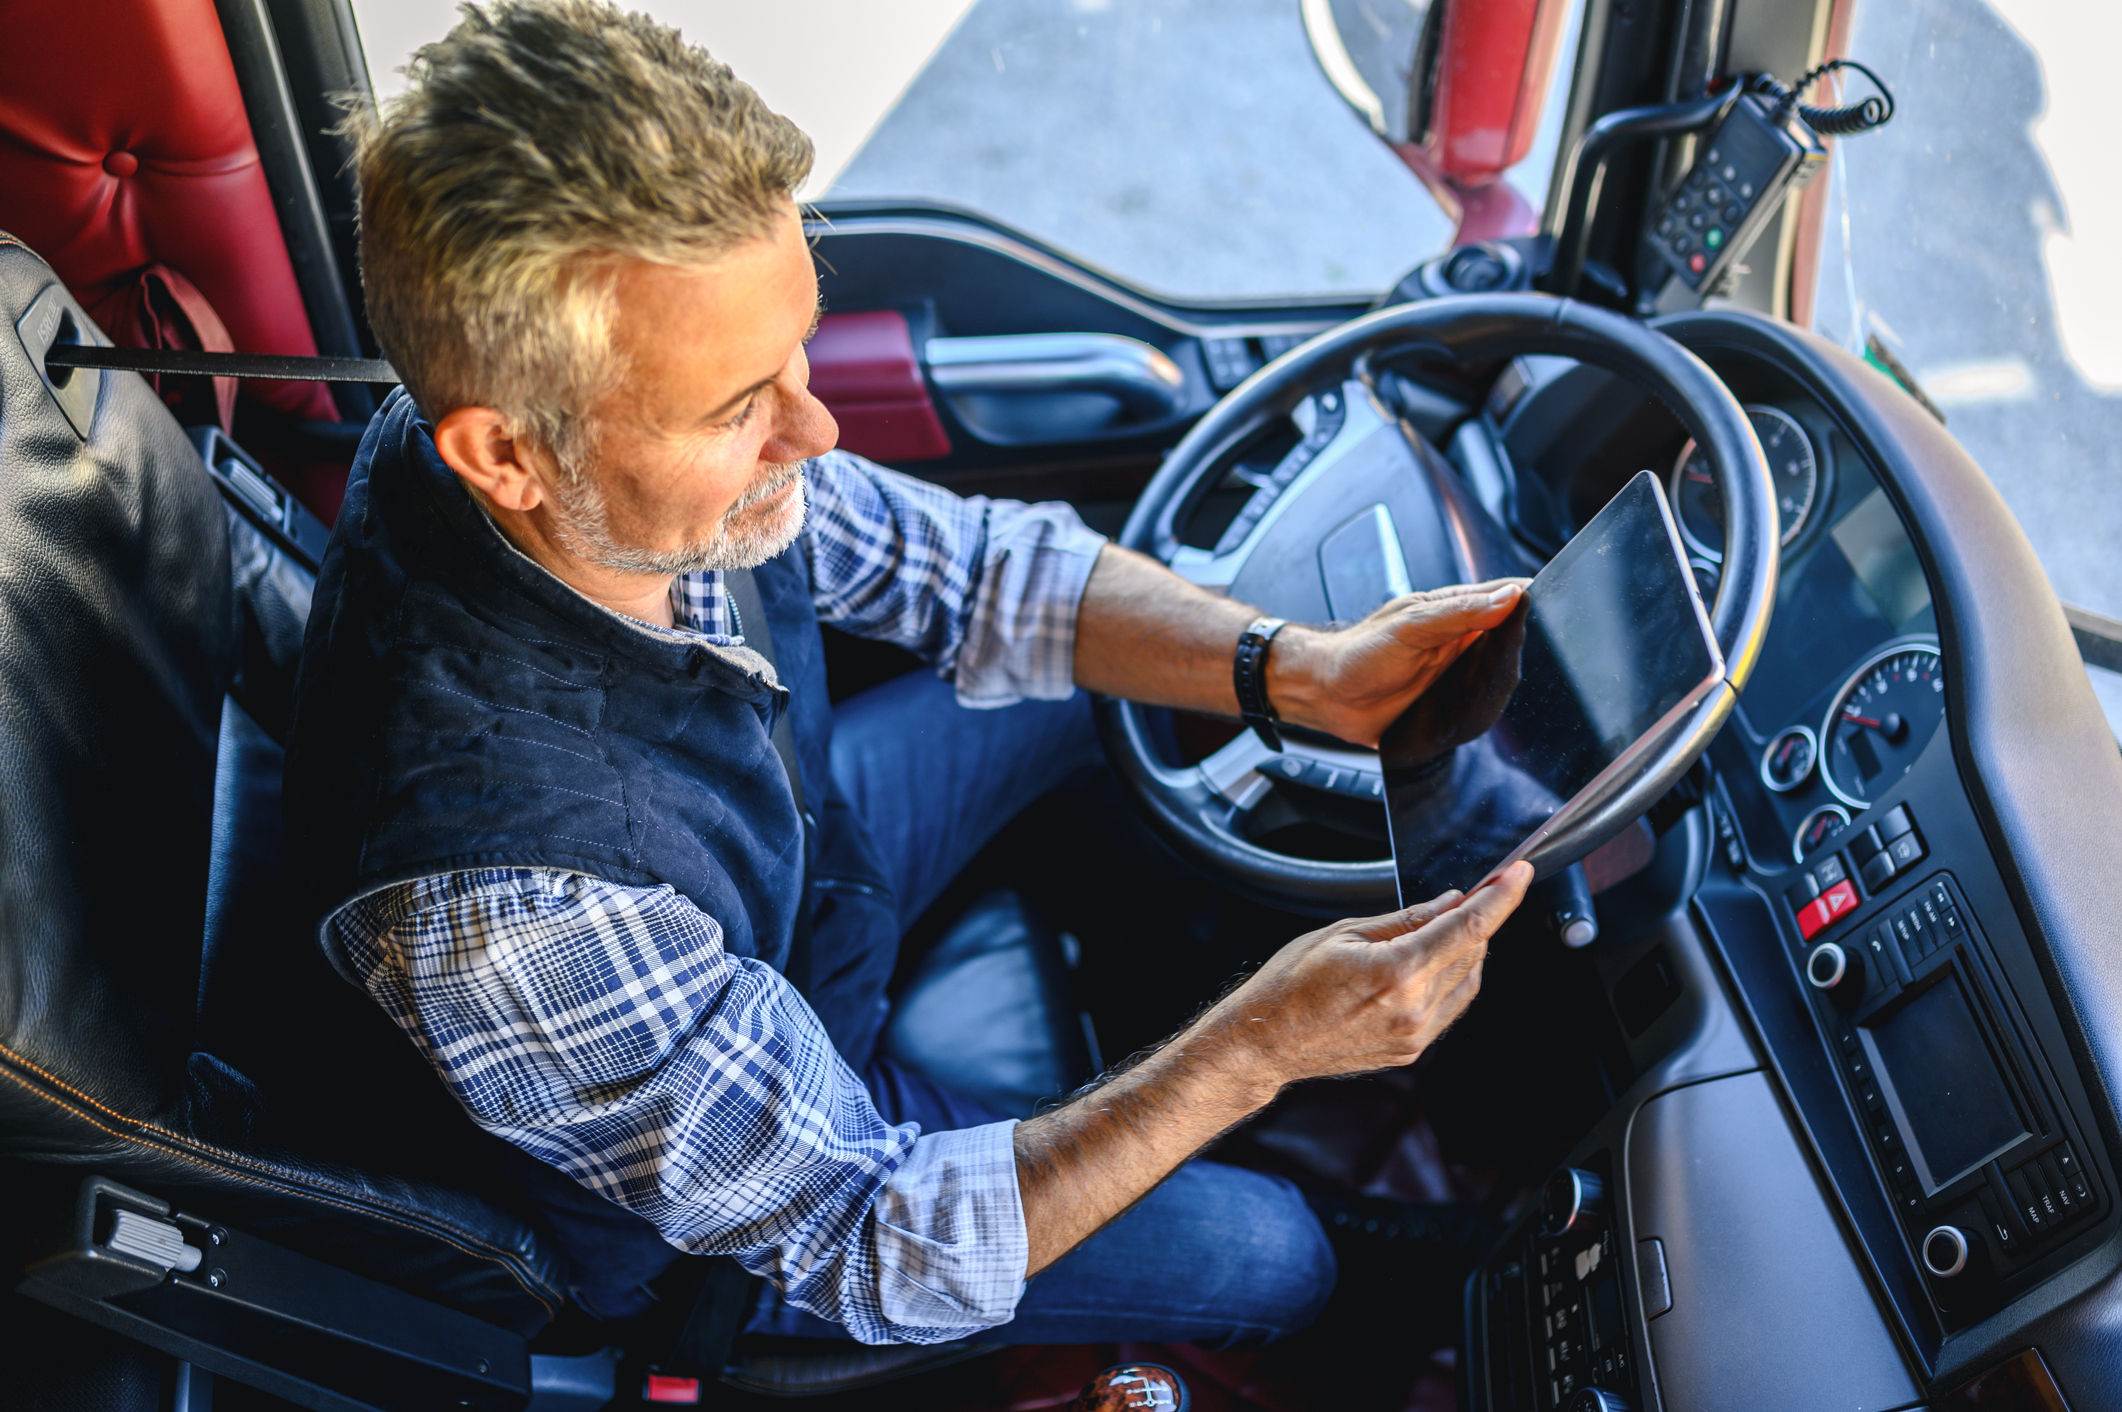 What Should Every Truck Driver Have? – Custom Diesel Drivers Training